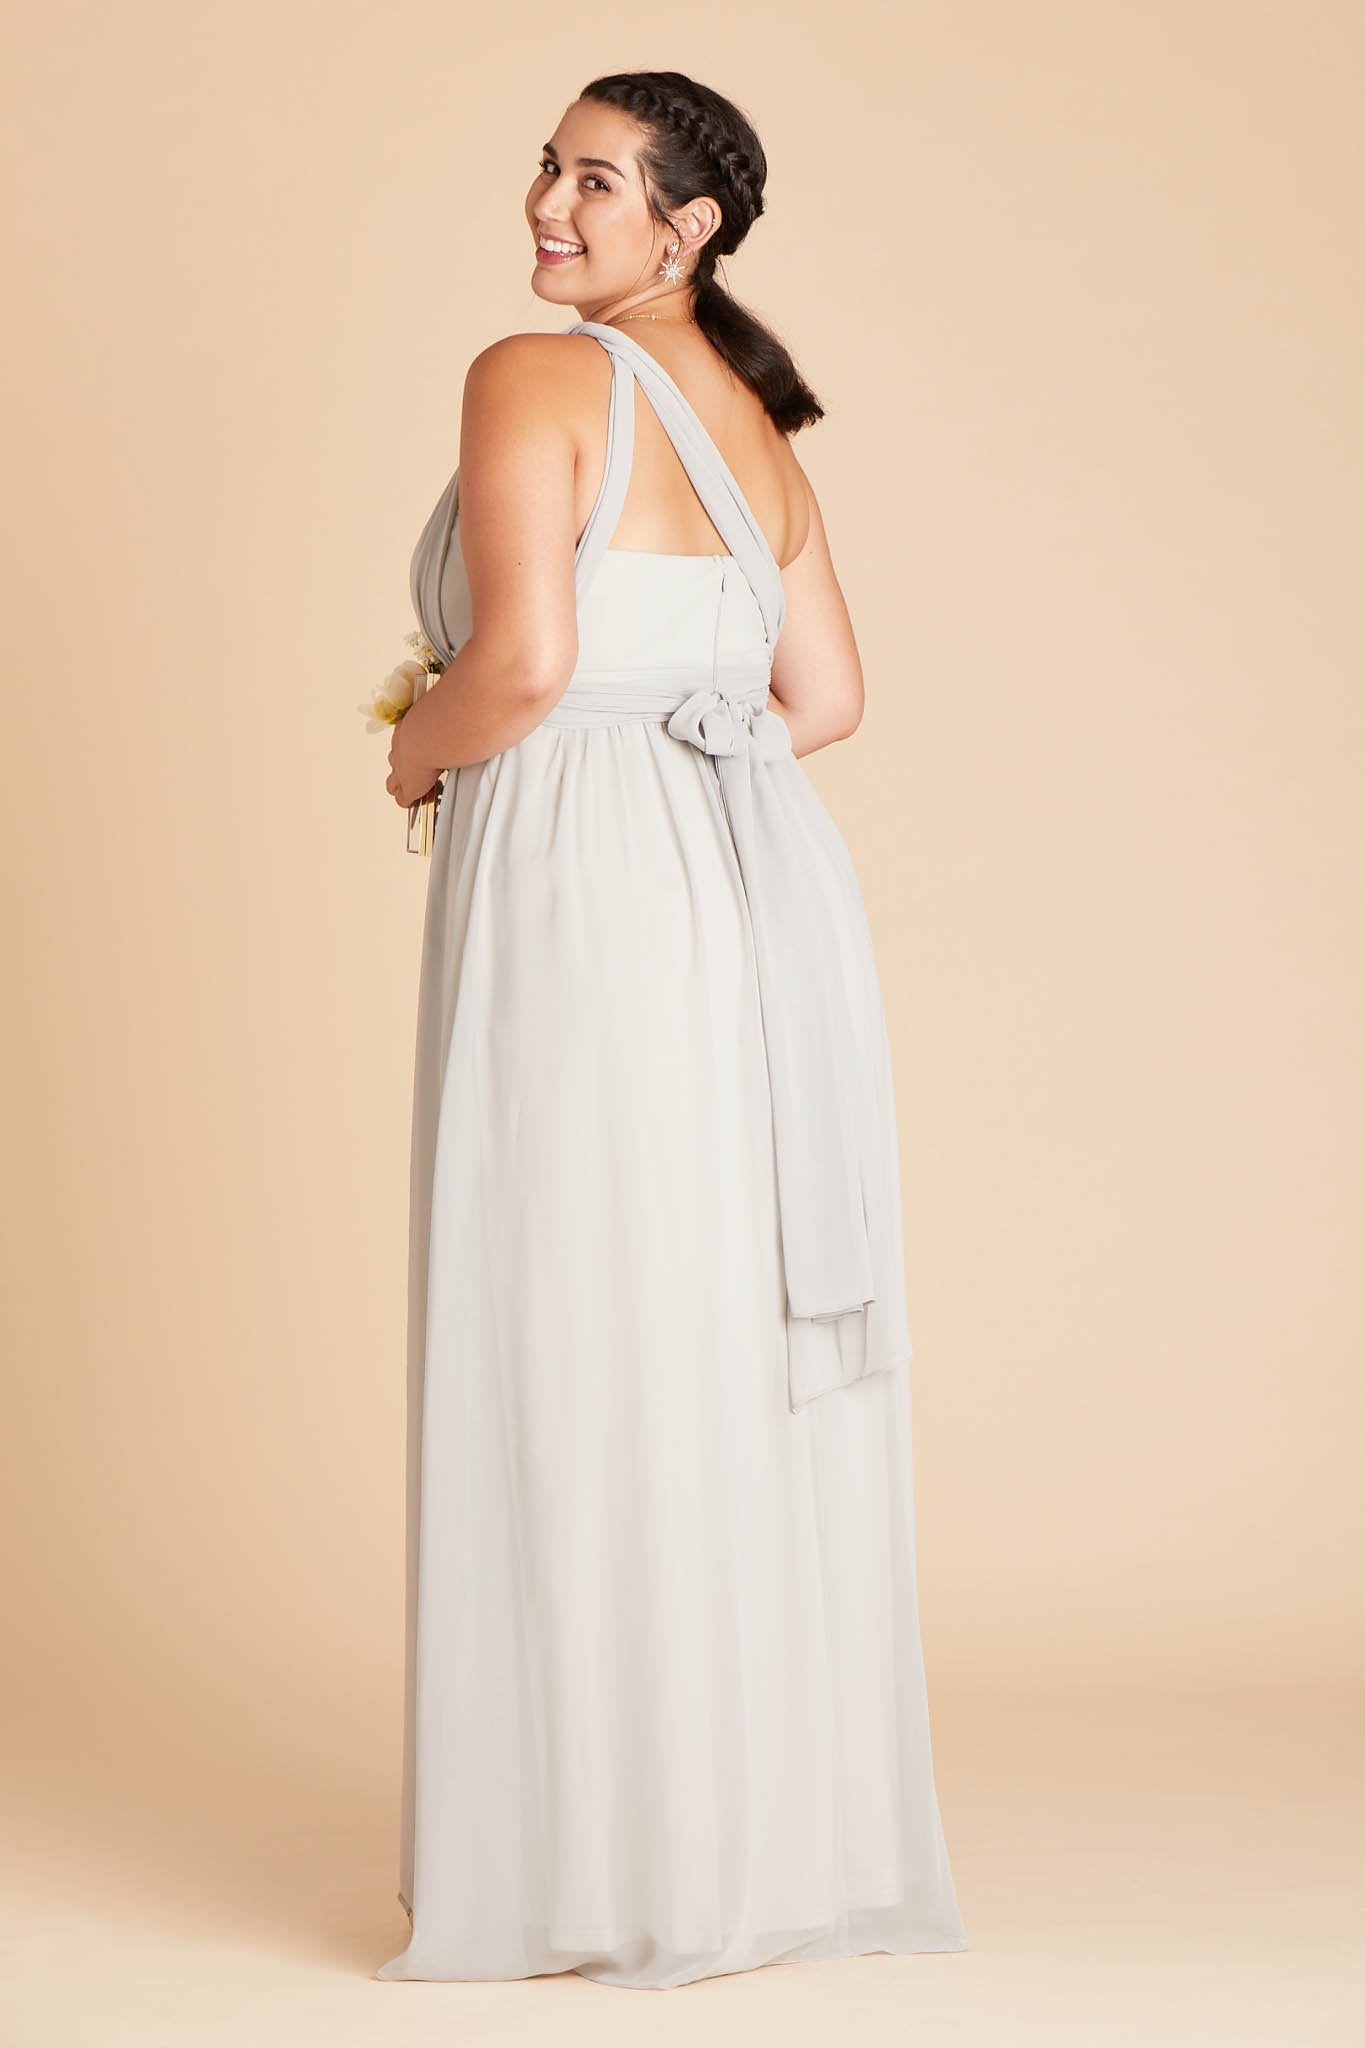 Grace convertible plus size bridesmaid dress in dove gray chiffon by Birdy Grey, back view